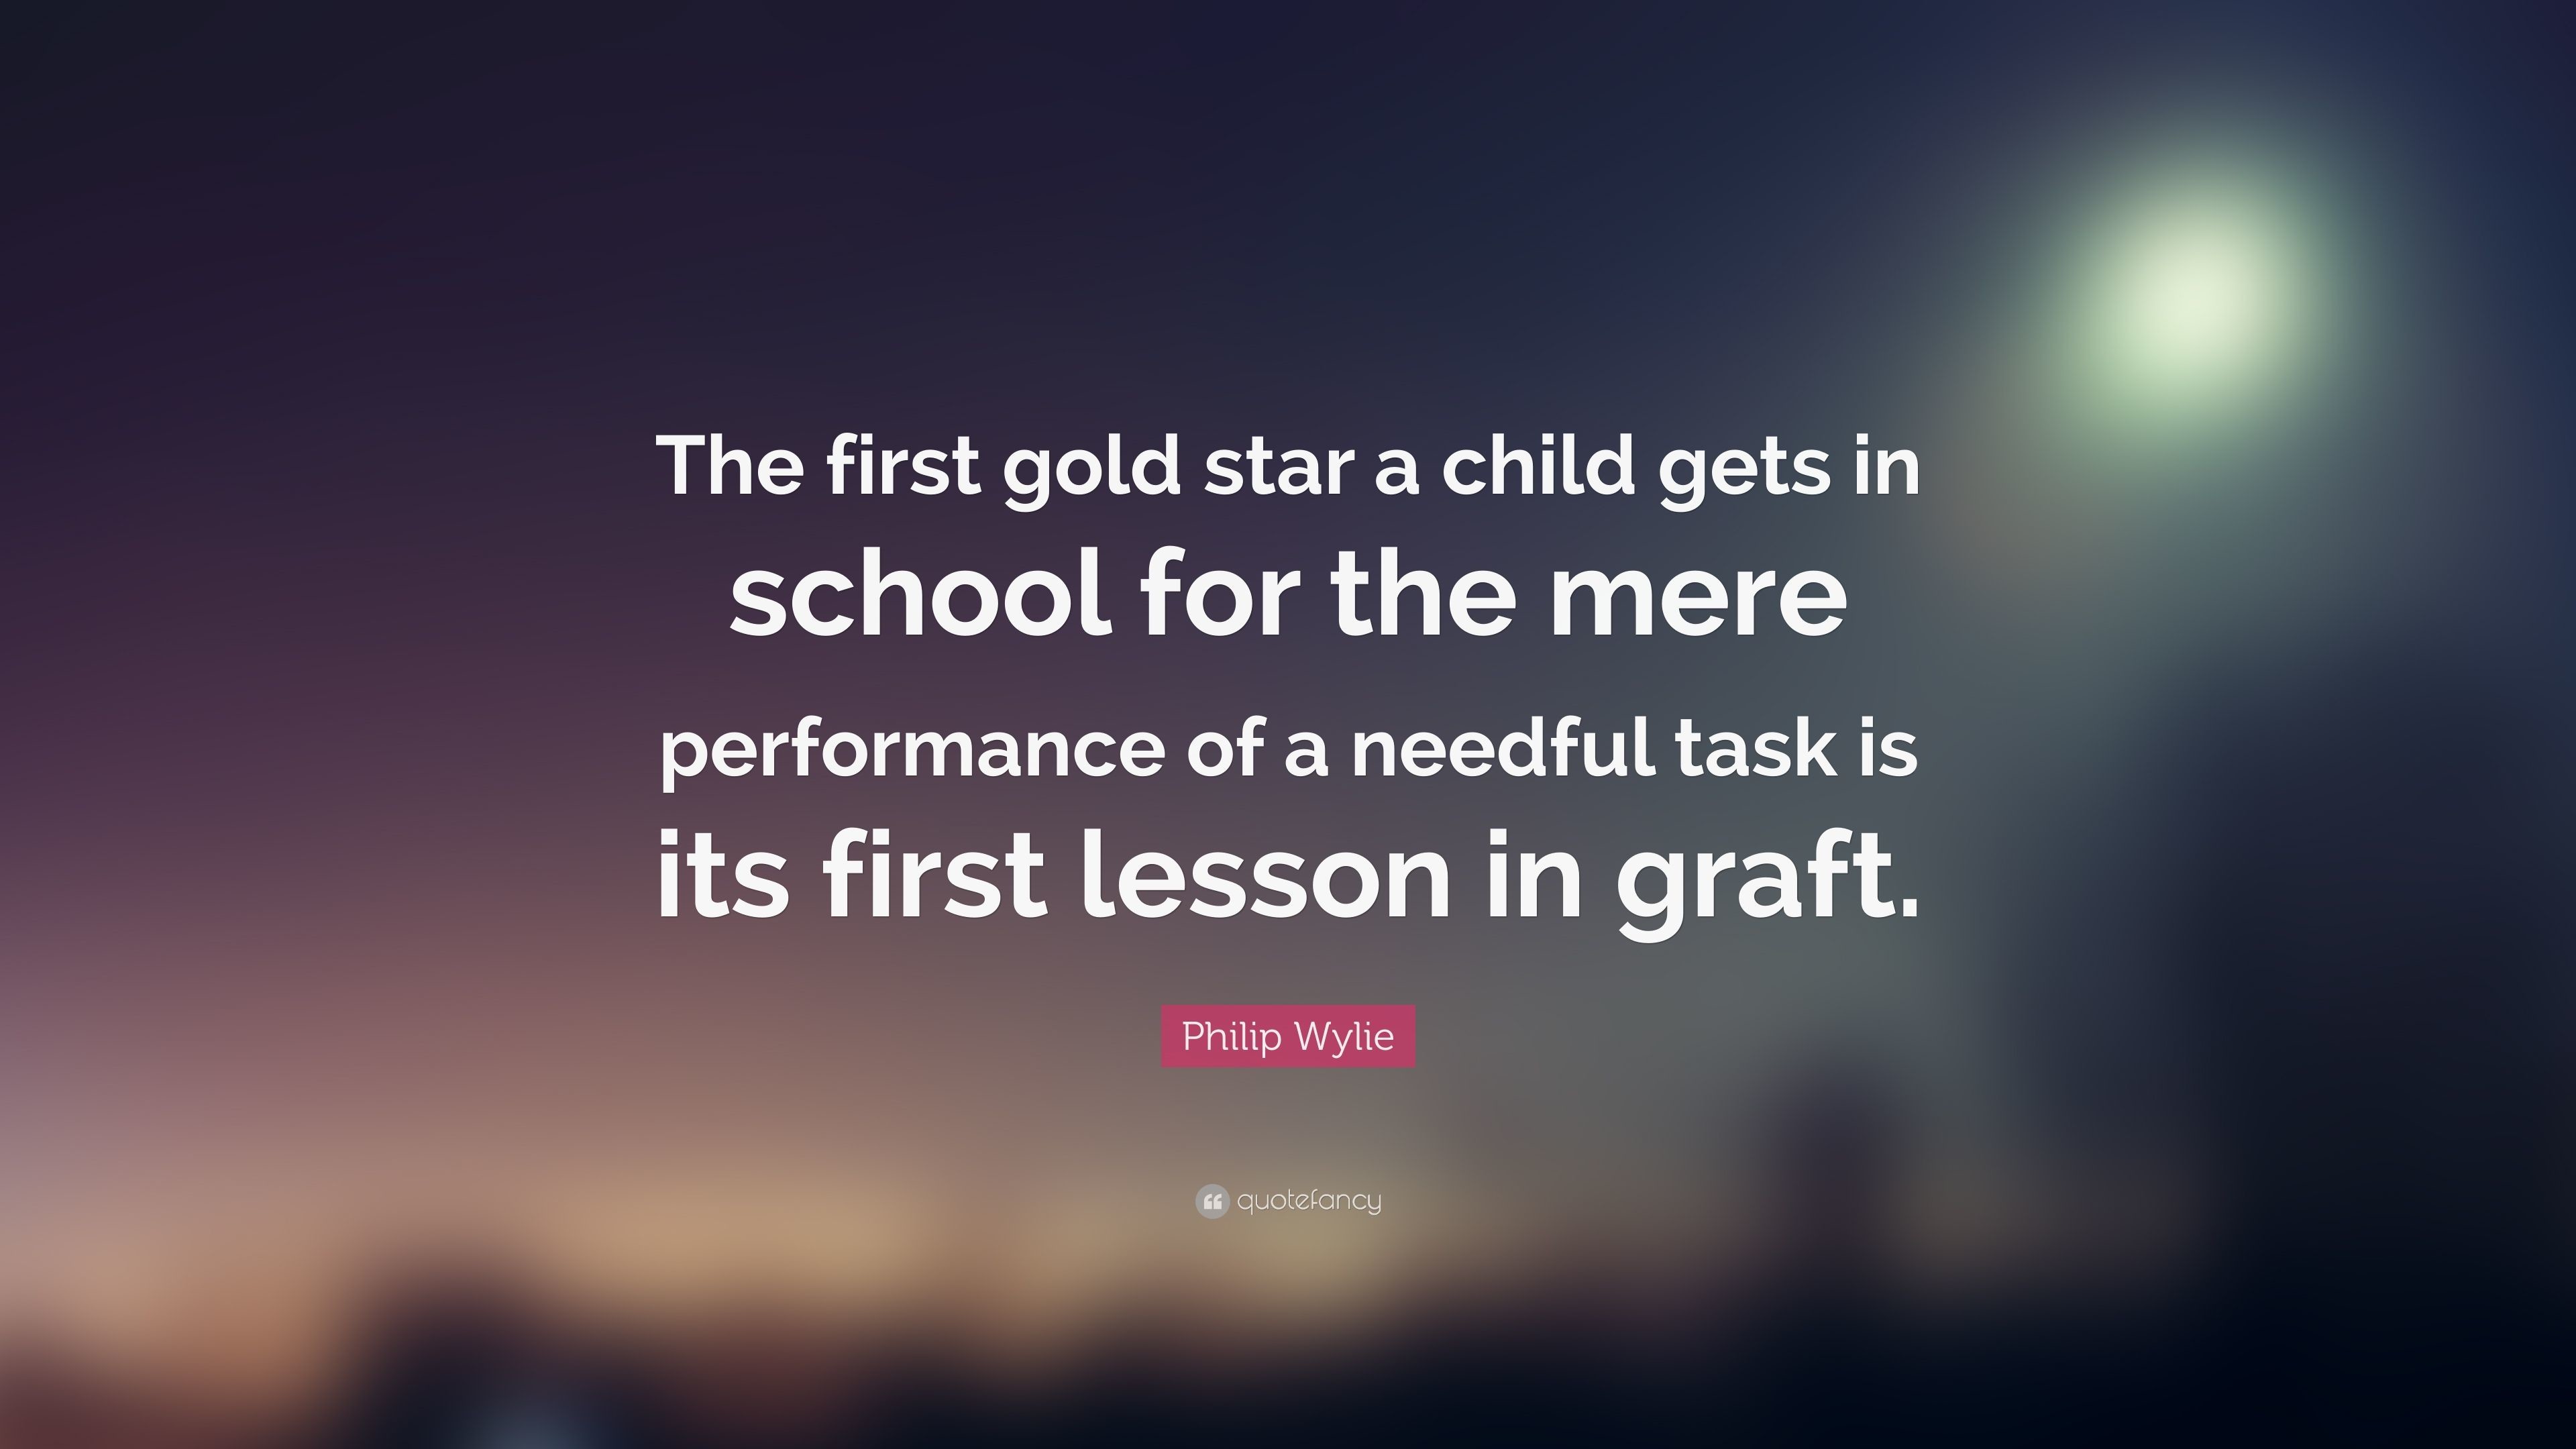 3840x2160 Philip Wylie Quote: “The first gold star a child gets in school for the